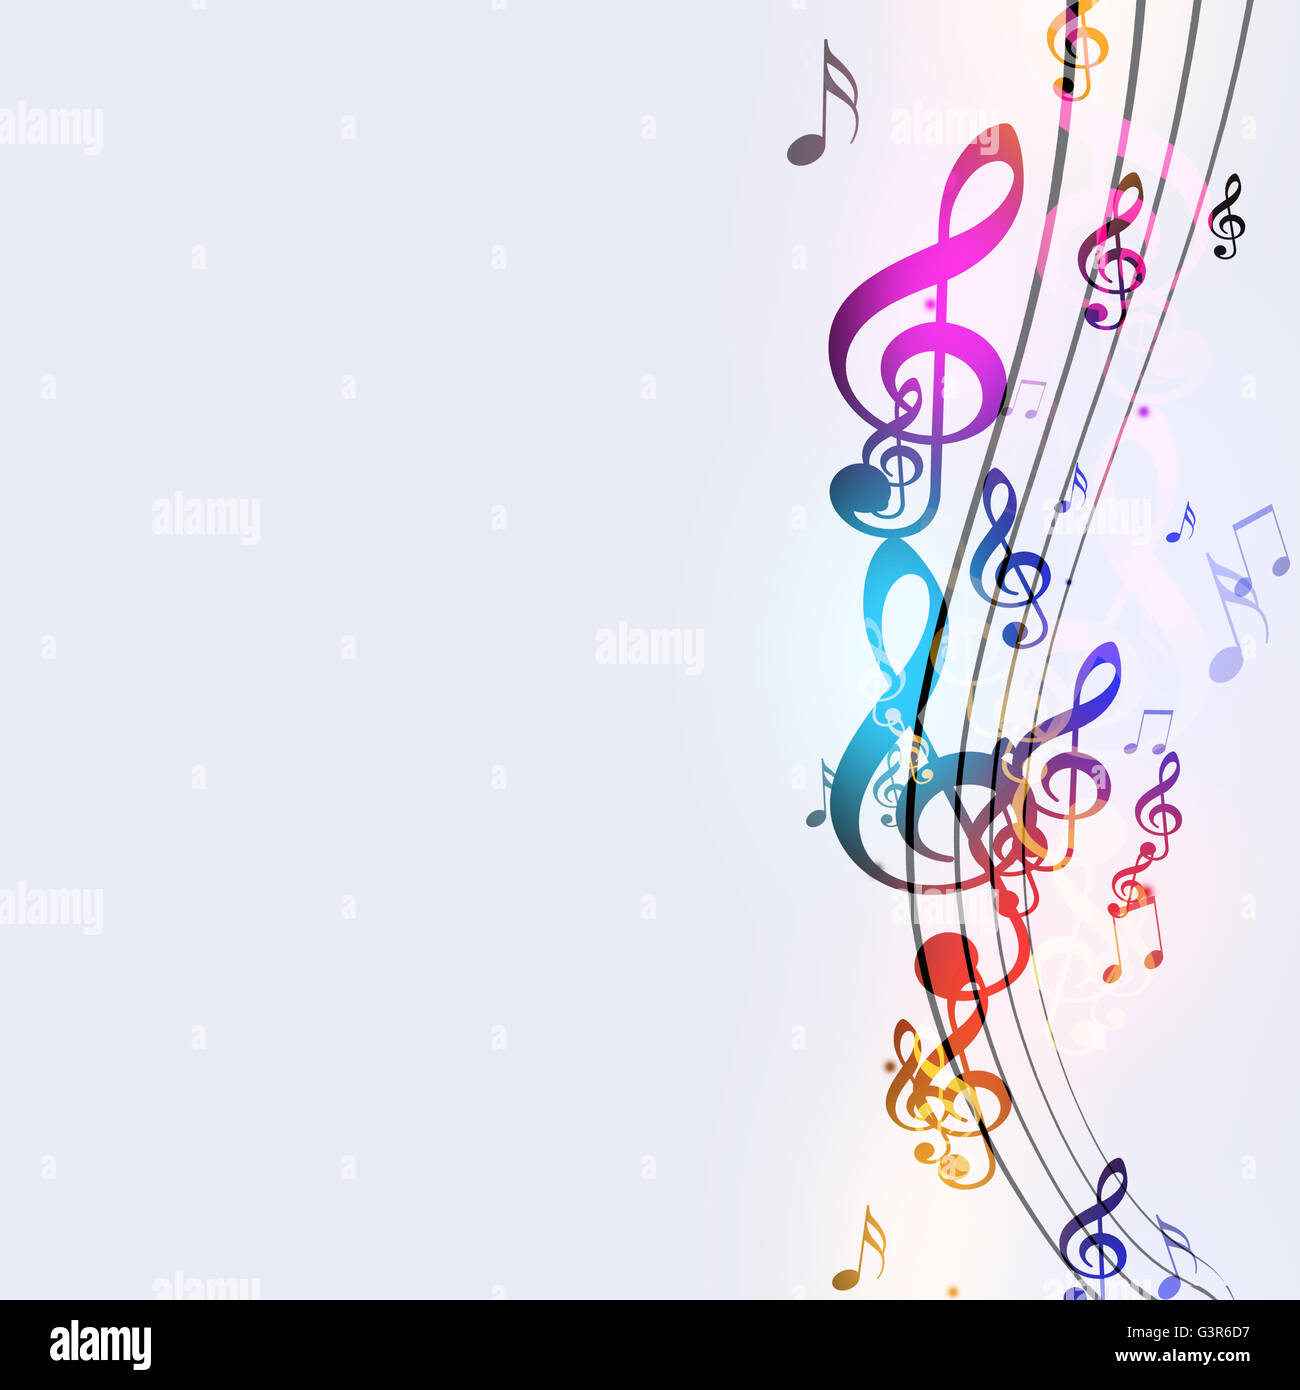 abstract bright background with funky music notes Stock Photo